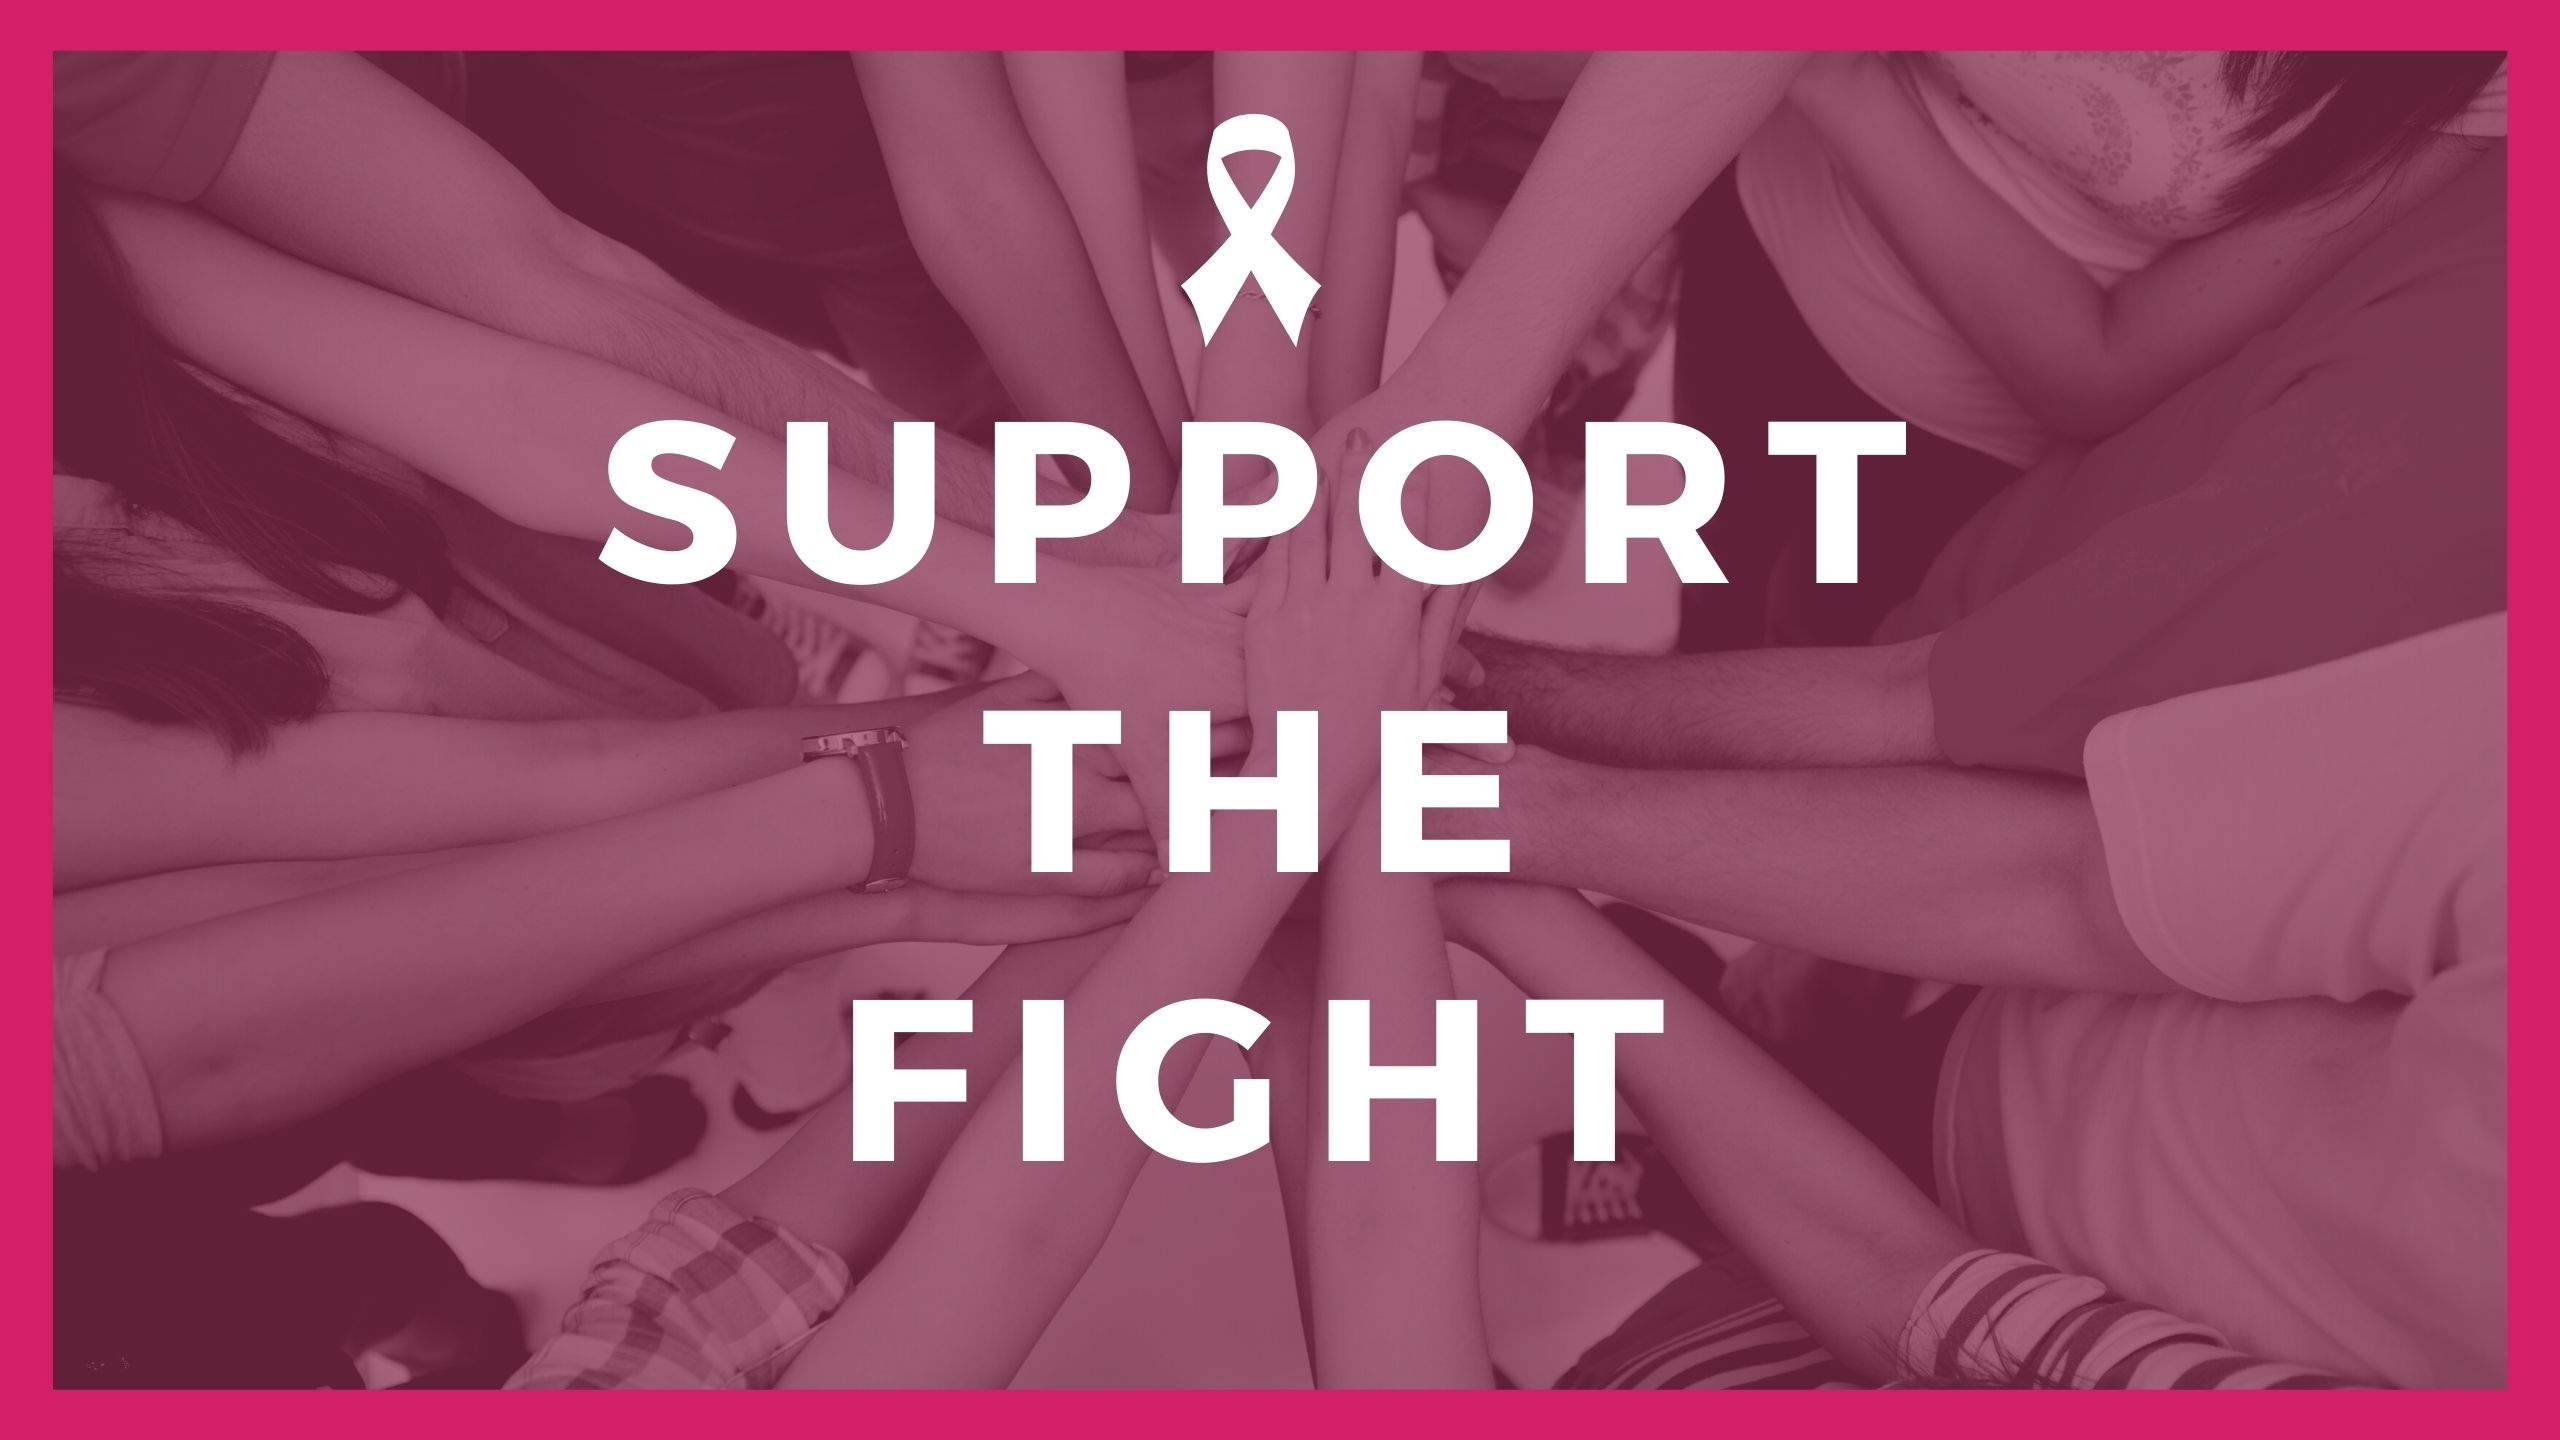 We Need Your Help To Fight Breast Cancer!